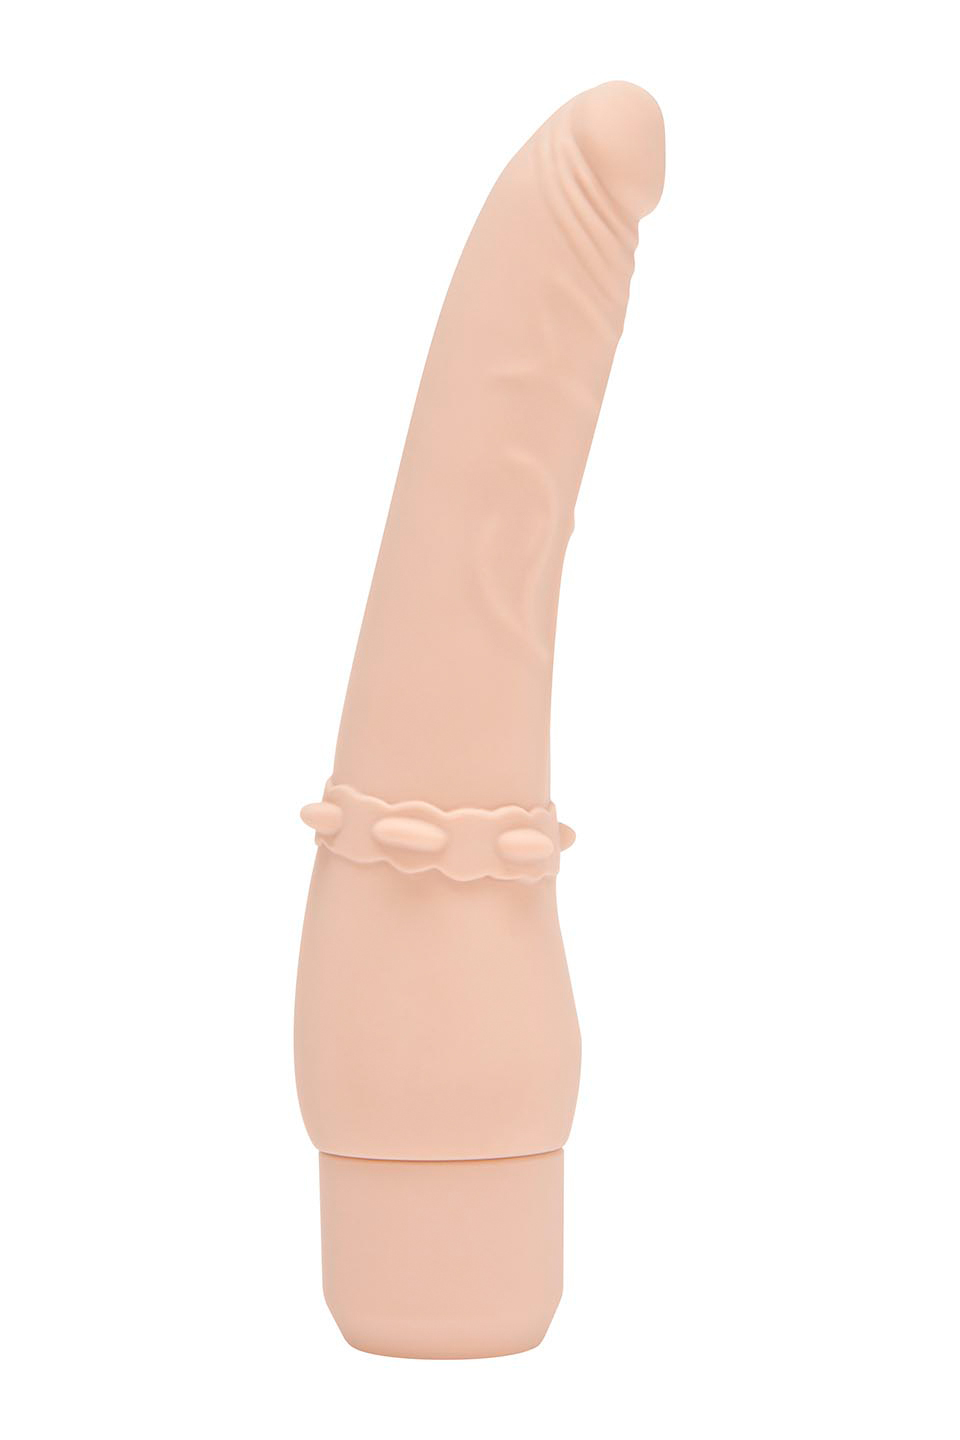 Get Real by TOYJOY Vibrator Classic Smooth